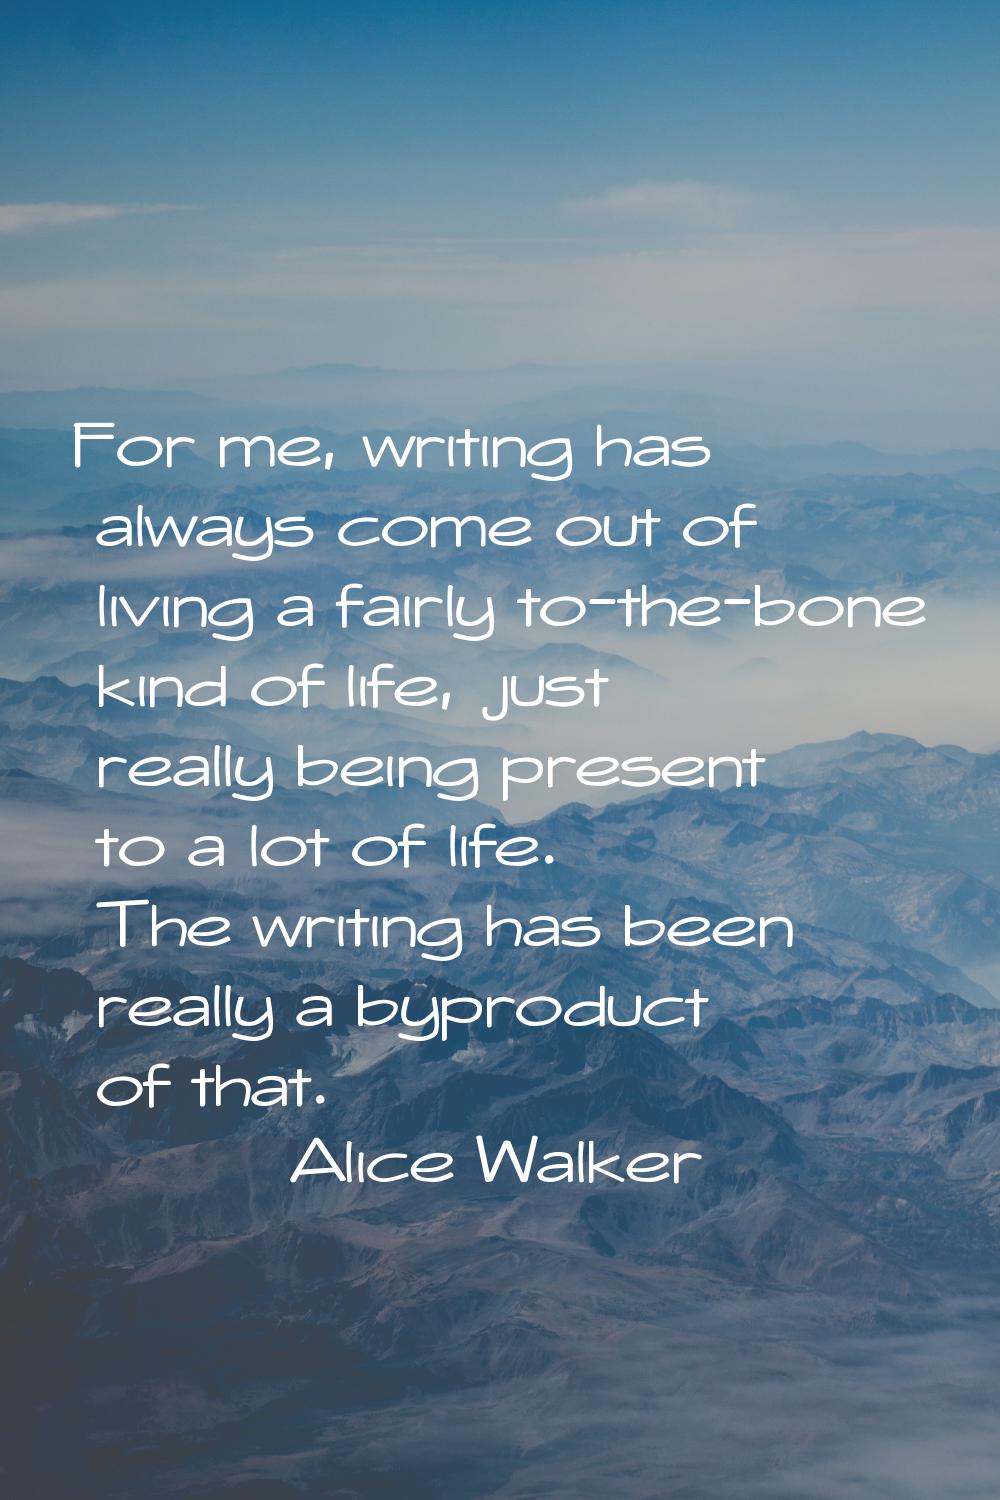 For me, writing has always come out of living a fairly to-the-bone kind of life, just really being 